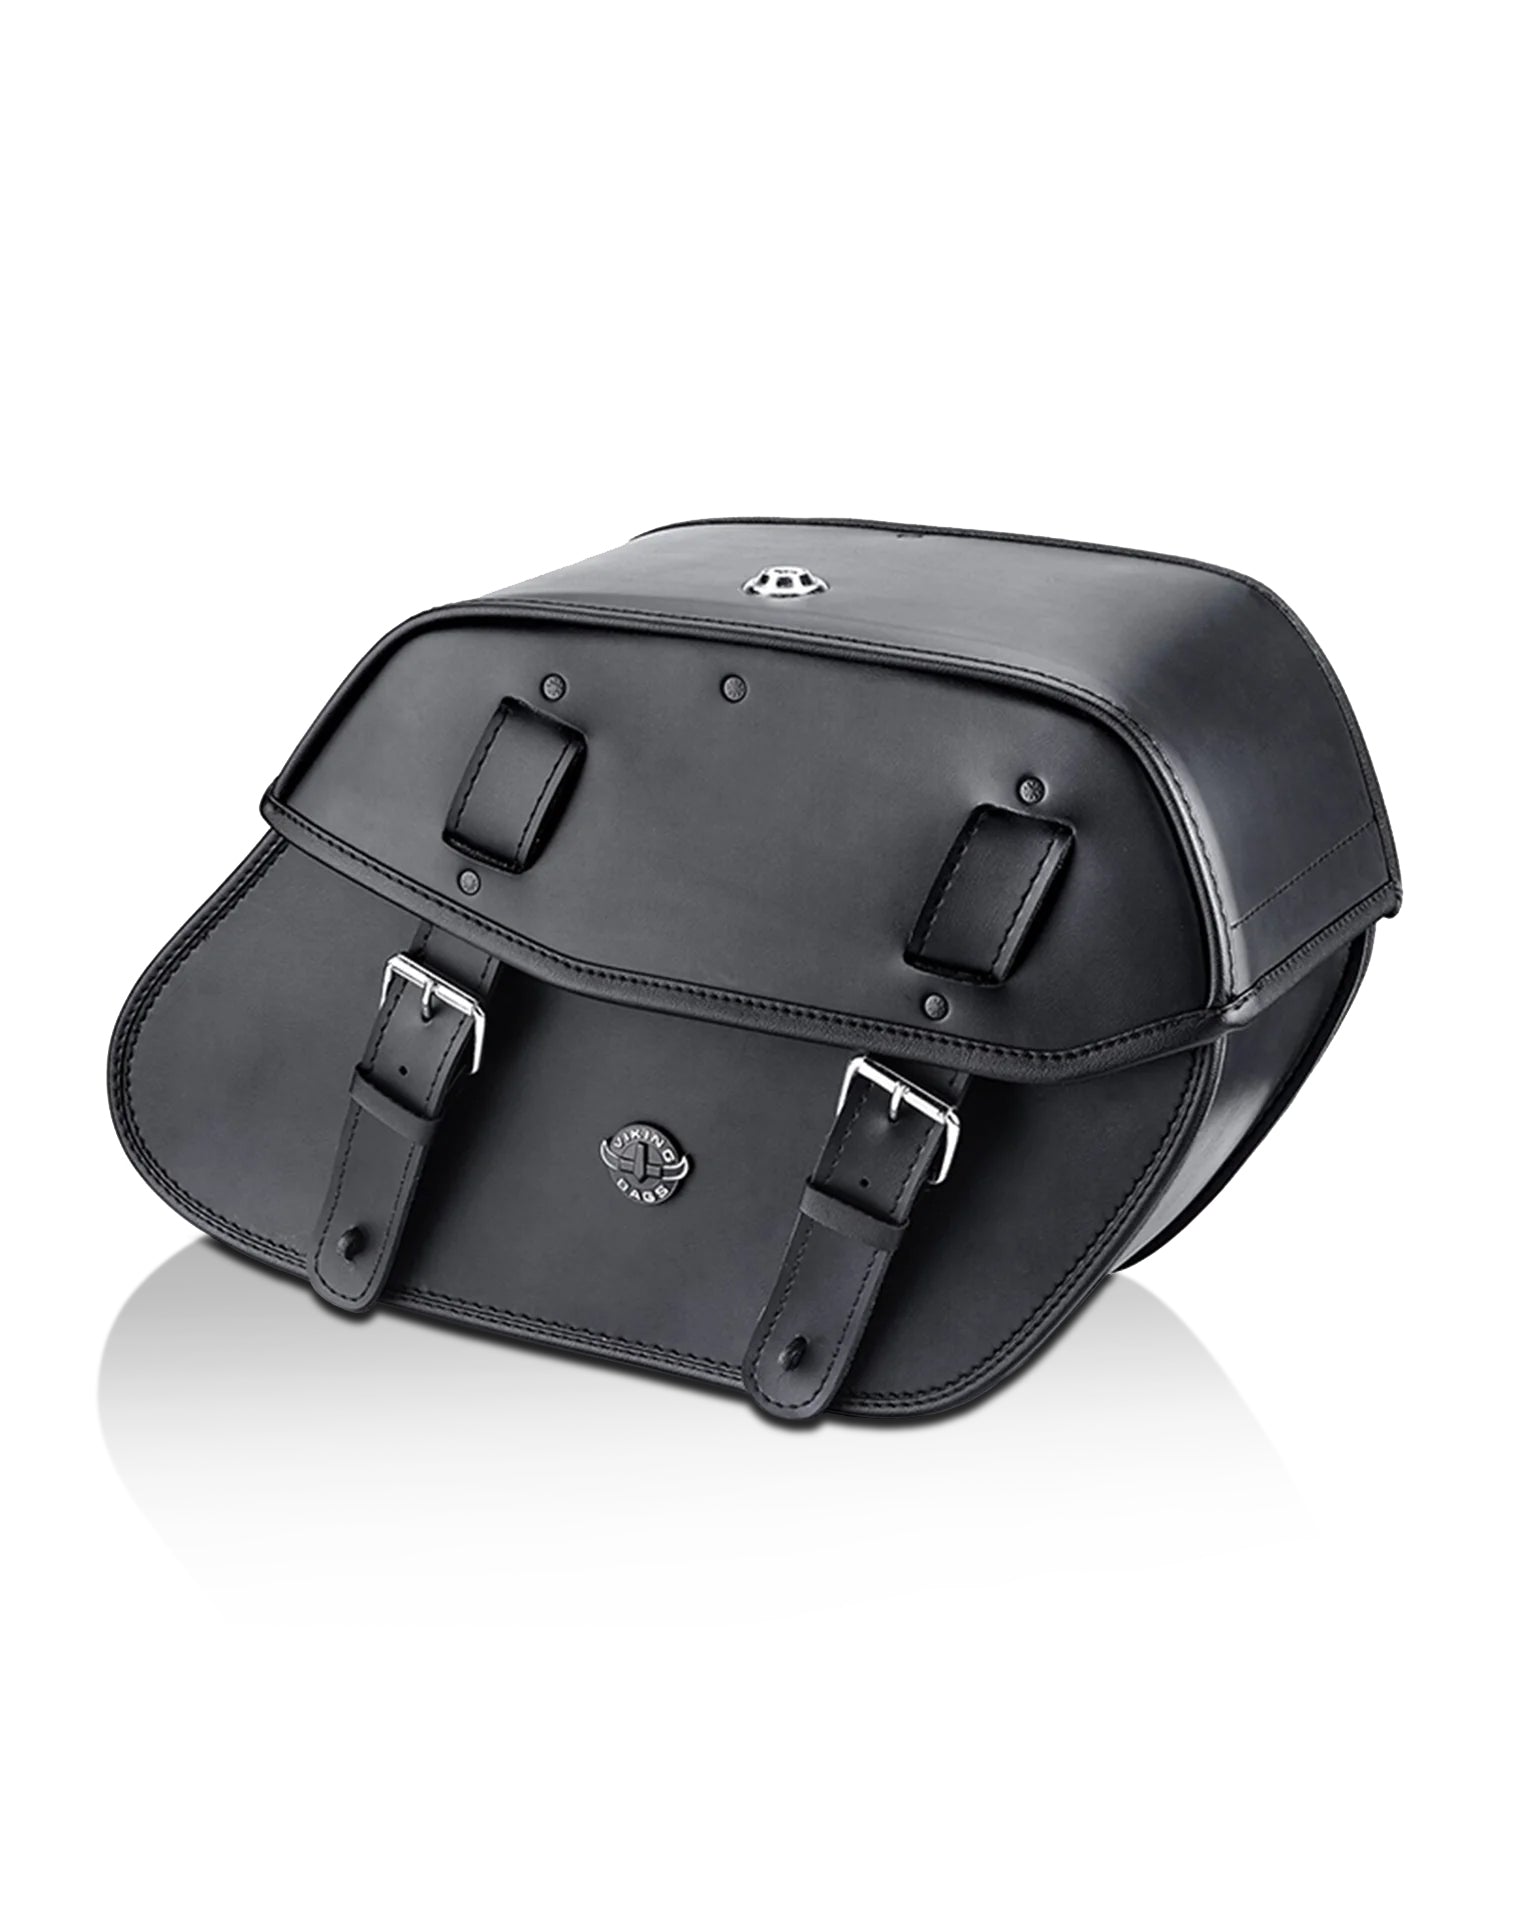 Viking Odin Large Leather Motorcycle Saddlebags For Harley Softail Fatboy Flstf I Main View